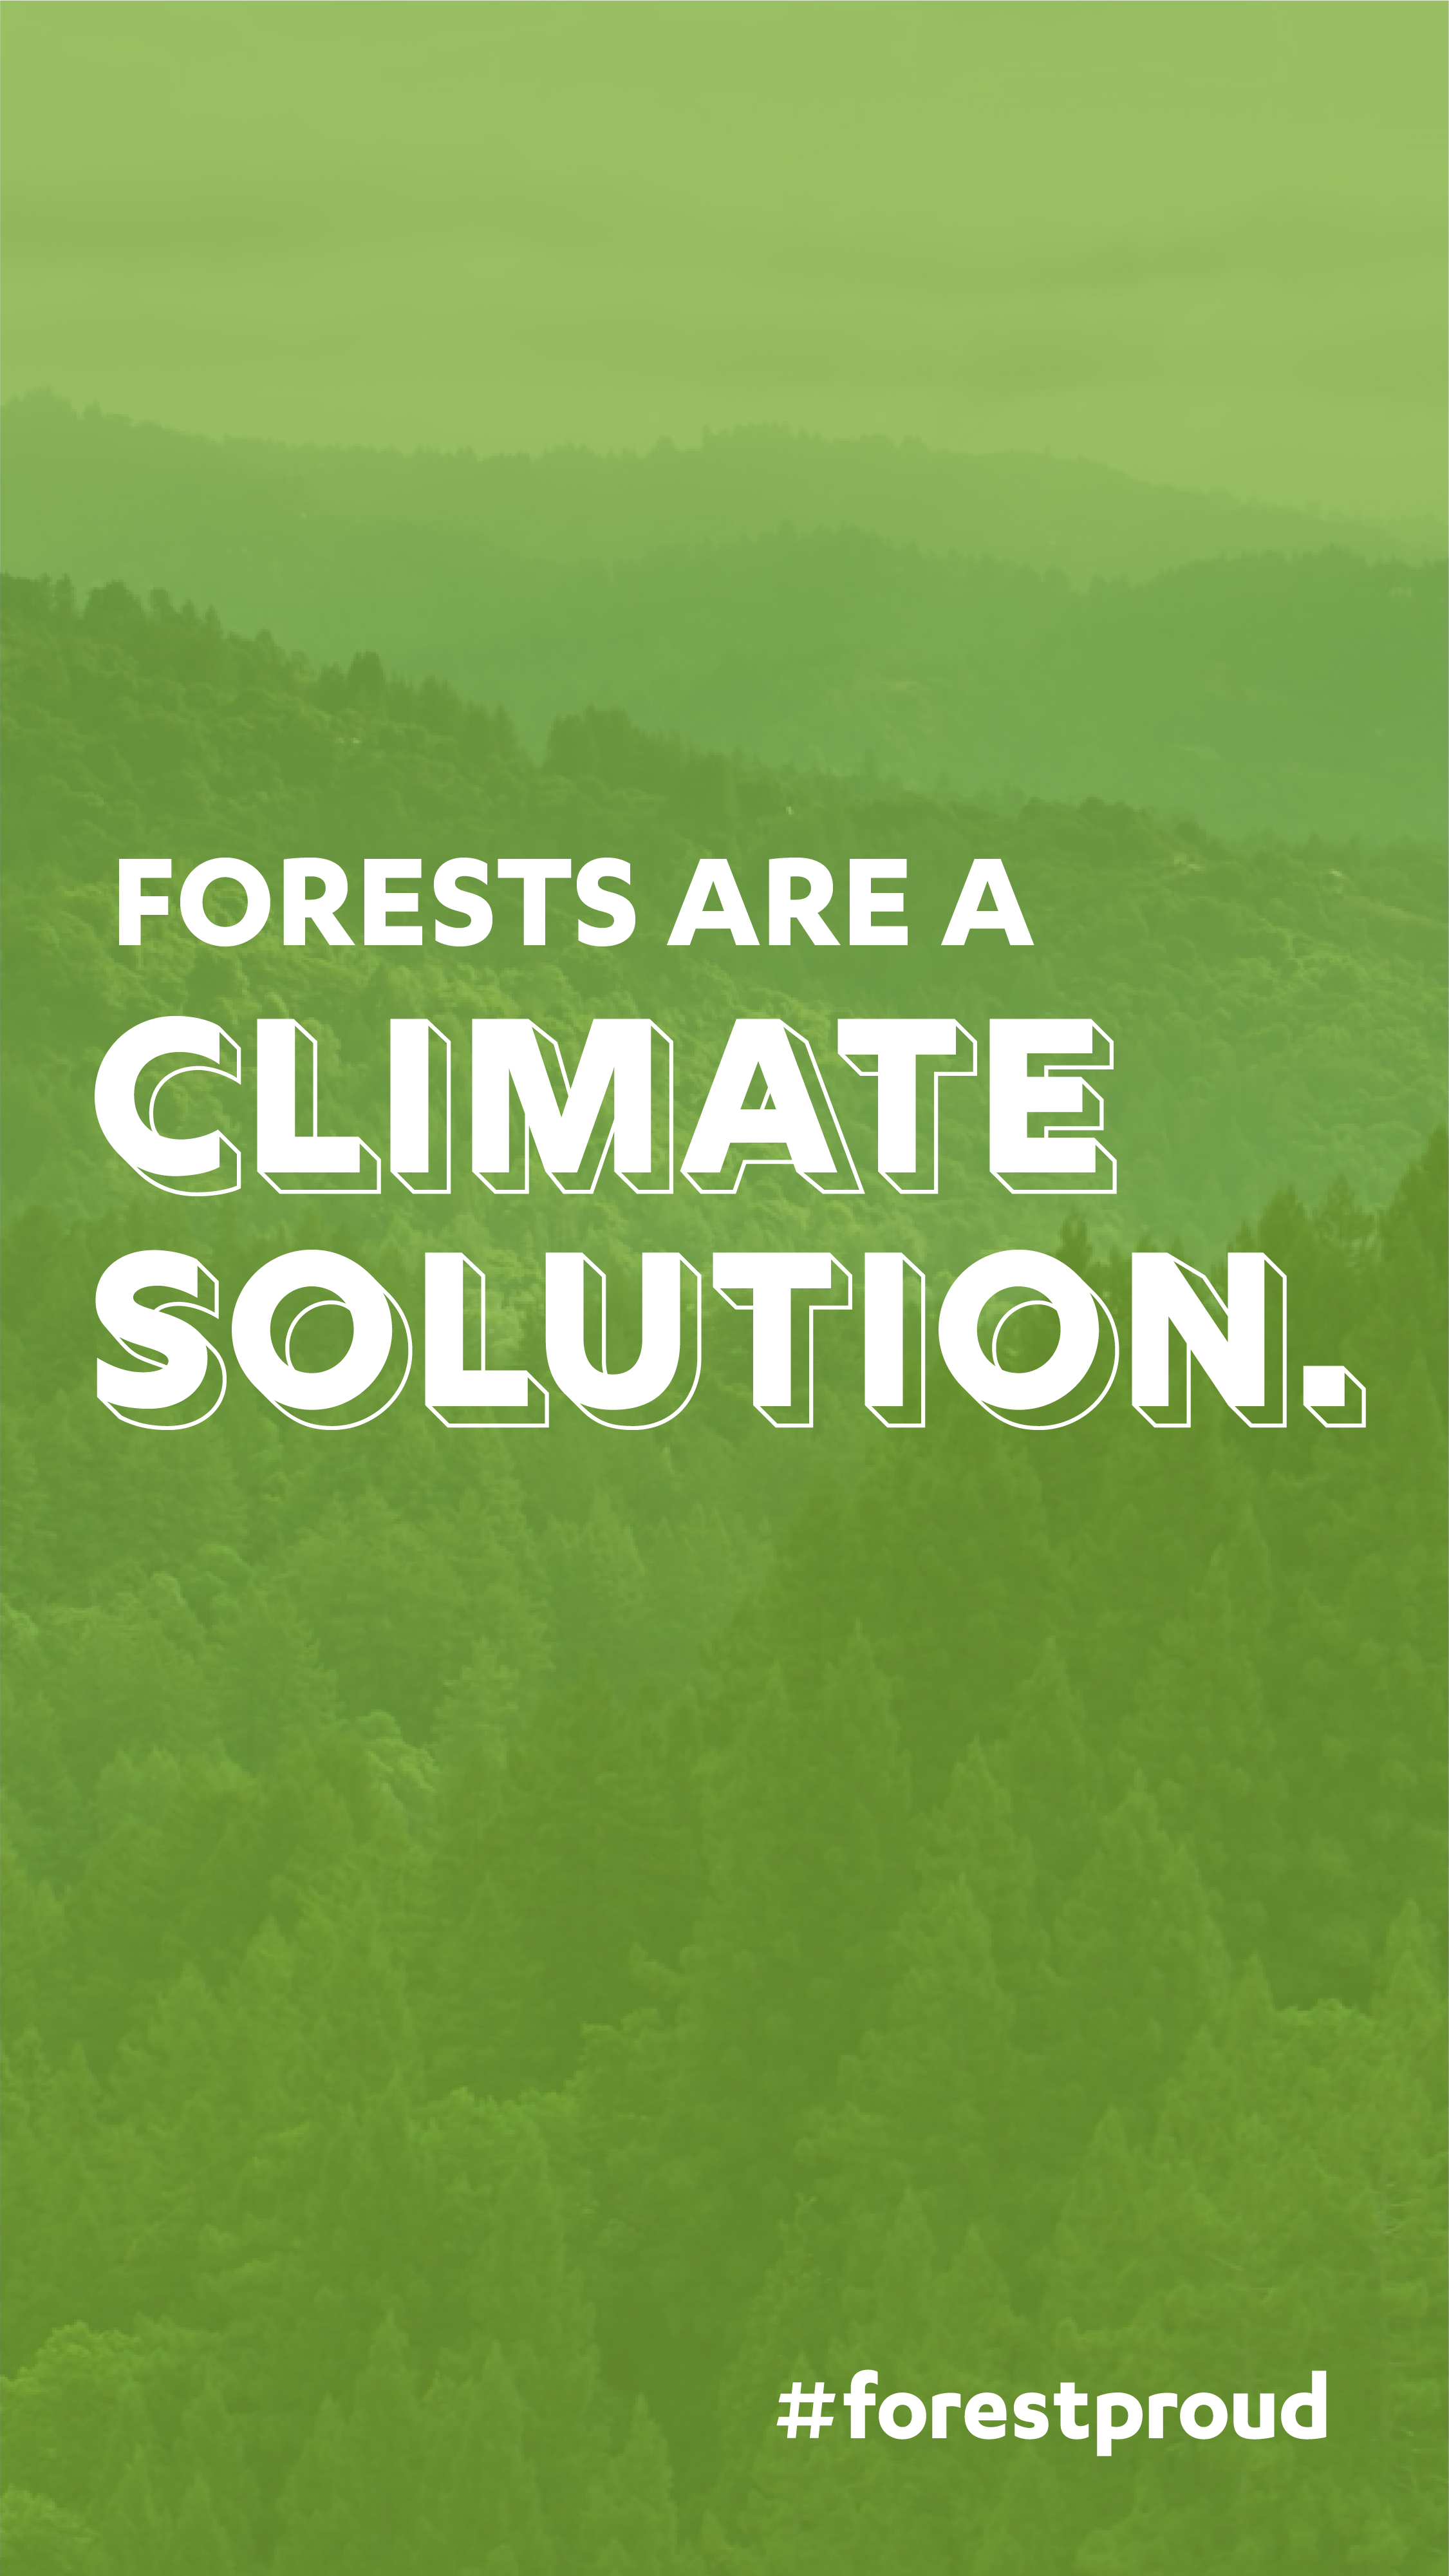 Forests are a climate solution